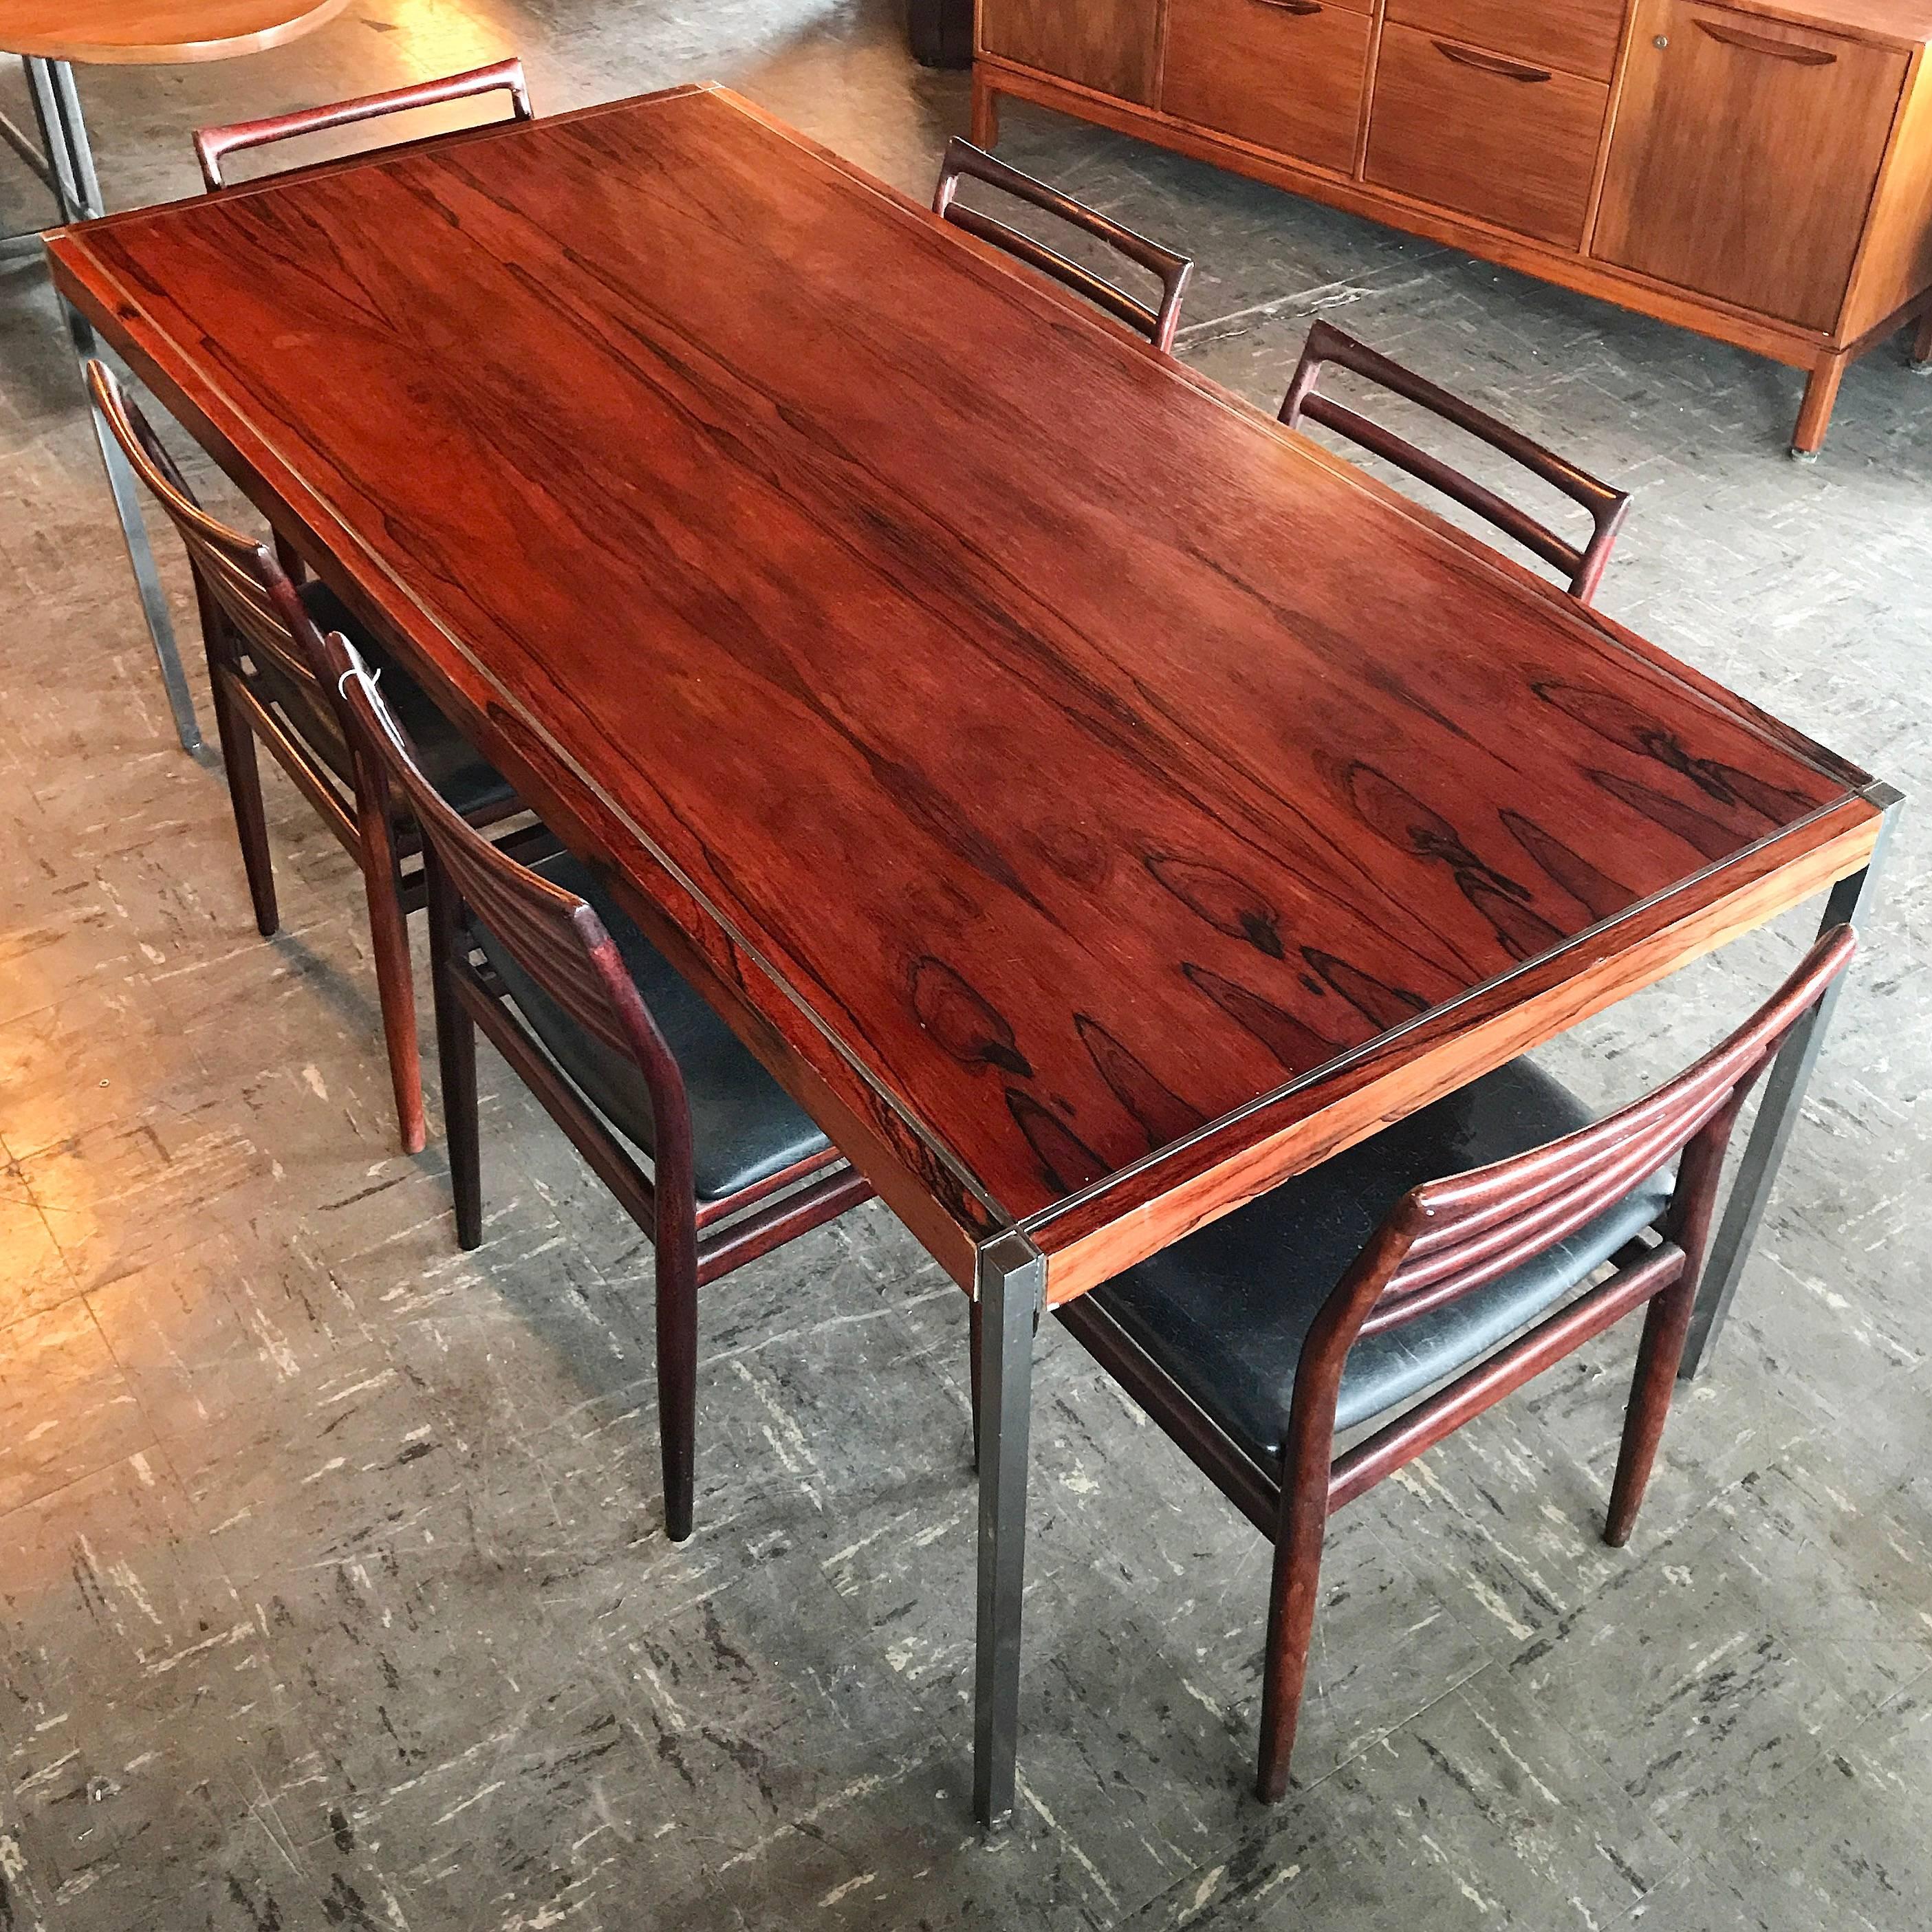 Beautiful rosewood table 
designed by Richard Schultz and only produced for a few years 
perfect size for a family or for an office 
great vintage condition 
with wear from age and use.
  